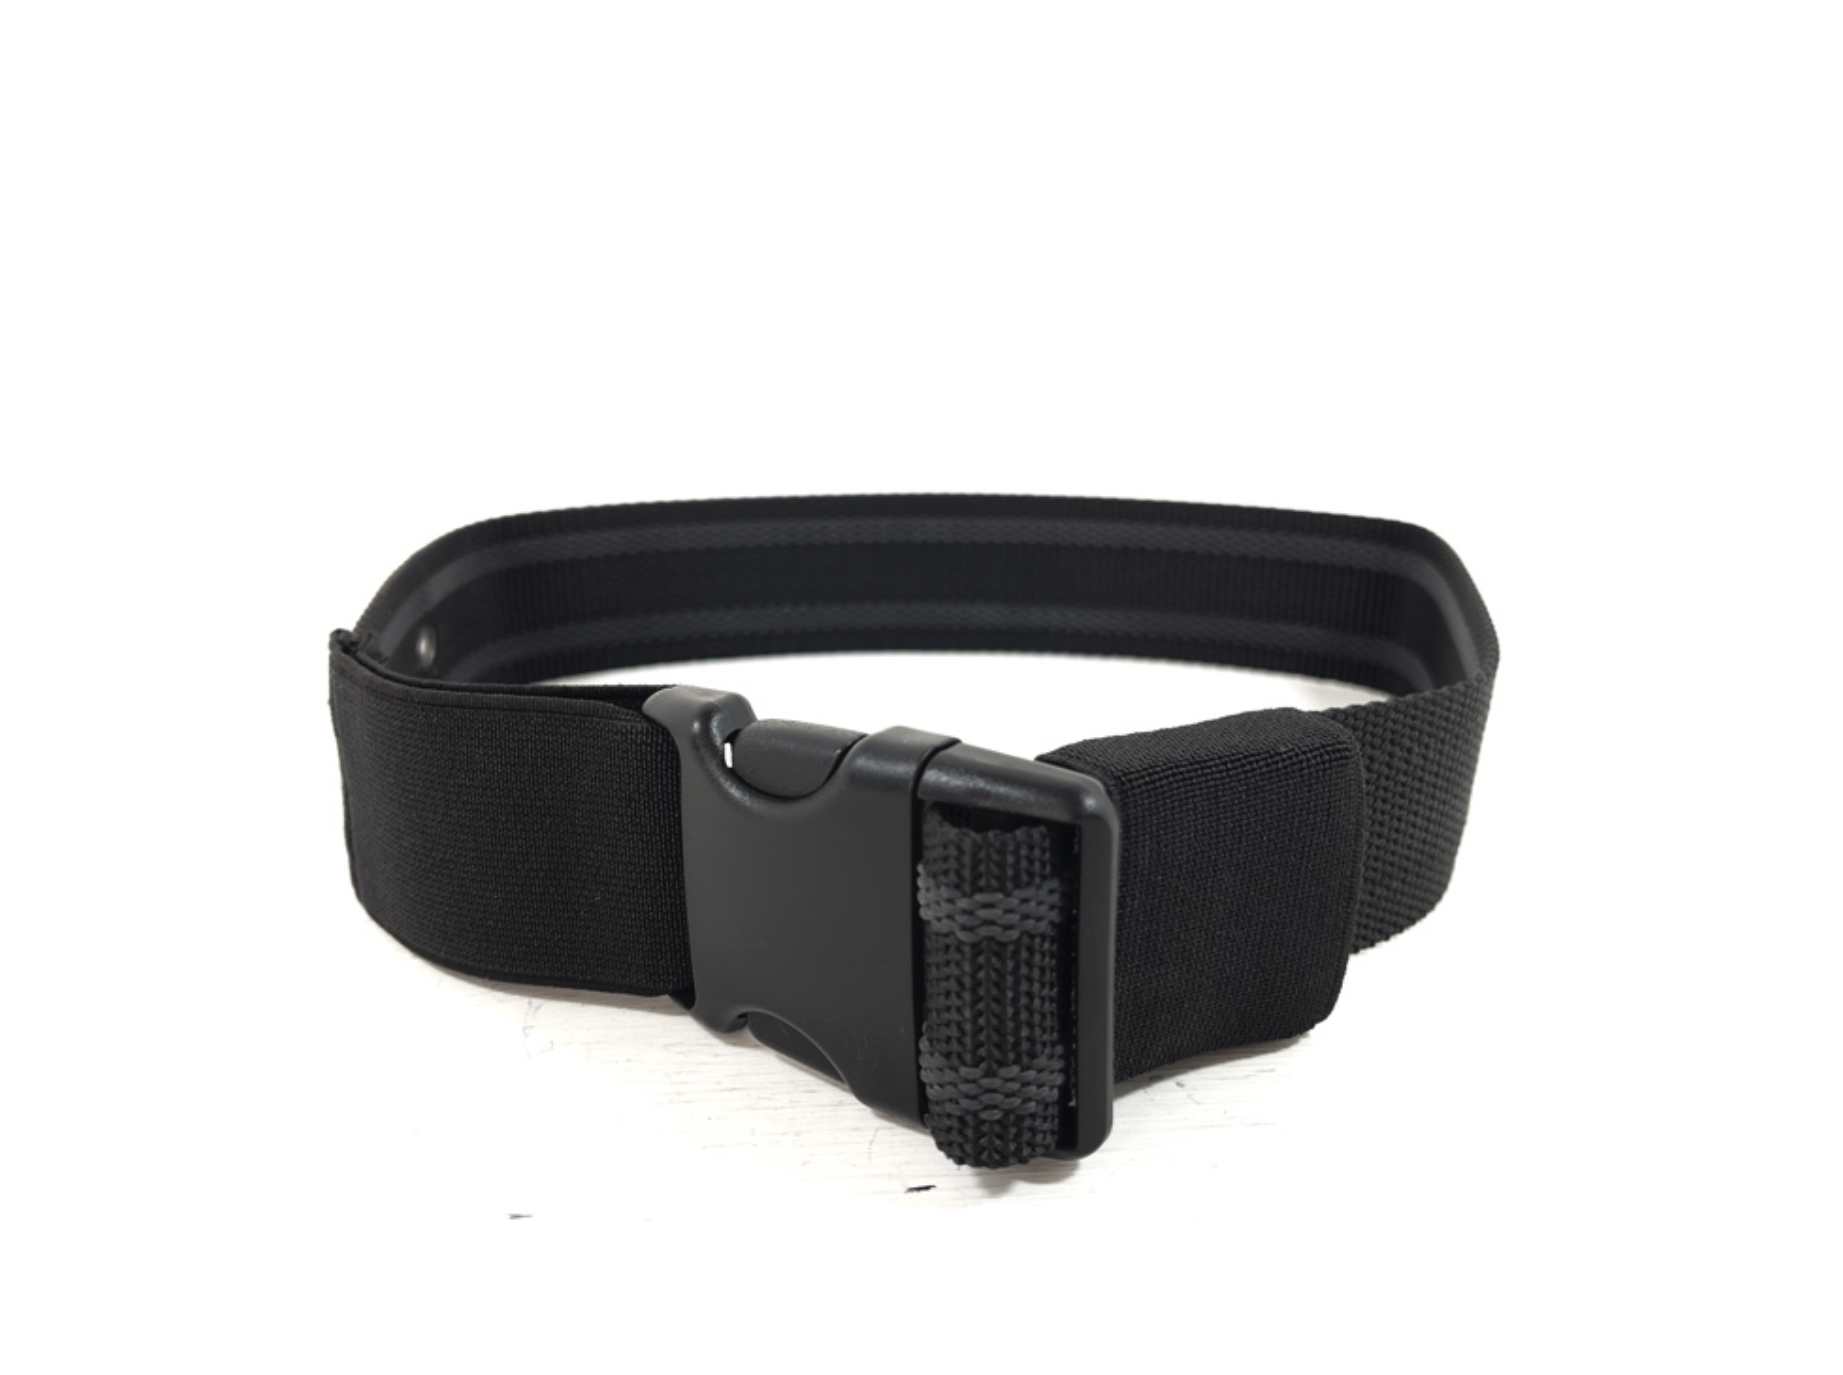 Black leg / thigh strap for mid ride mounts and holsters – Extreme Airsoft